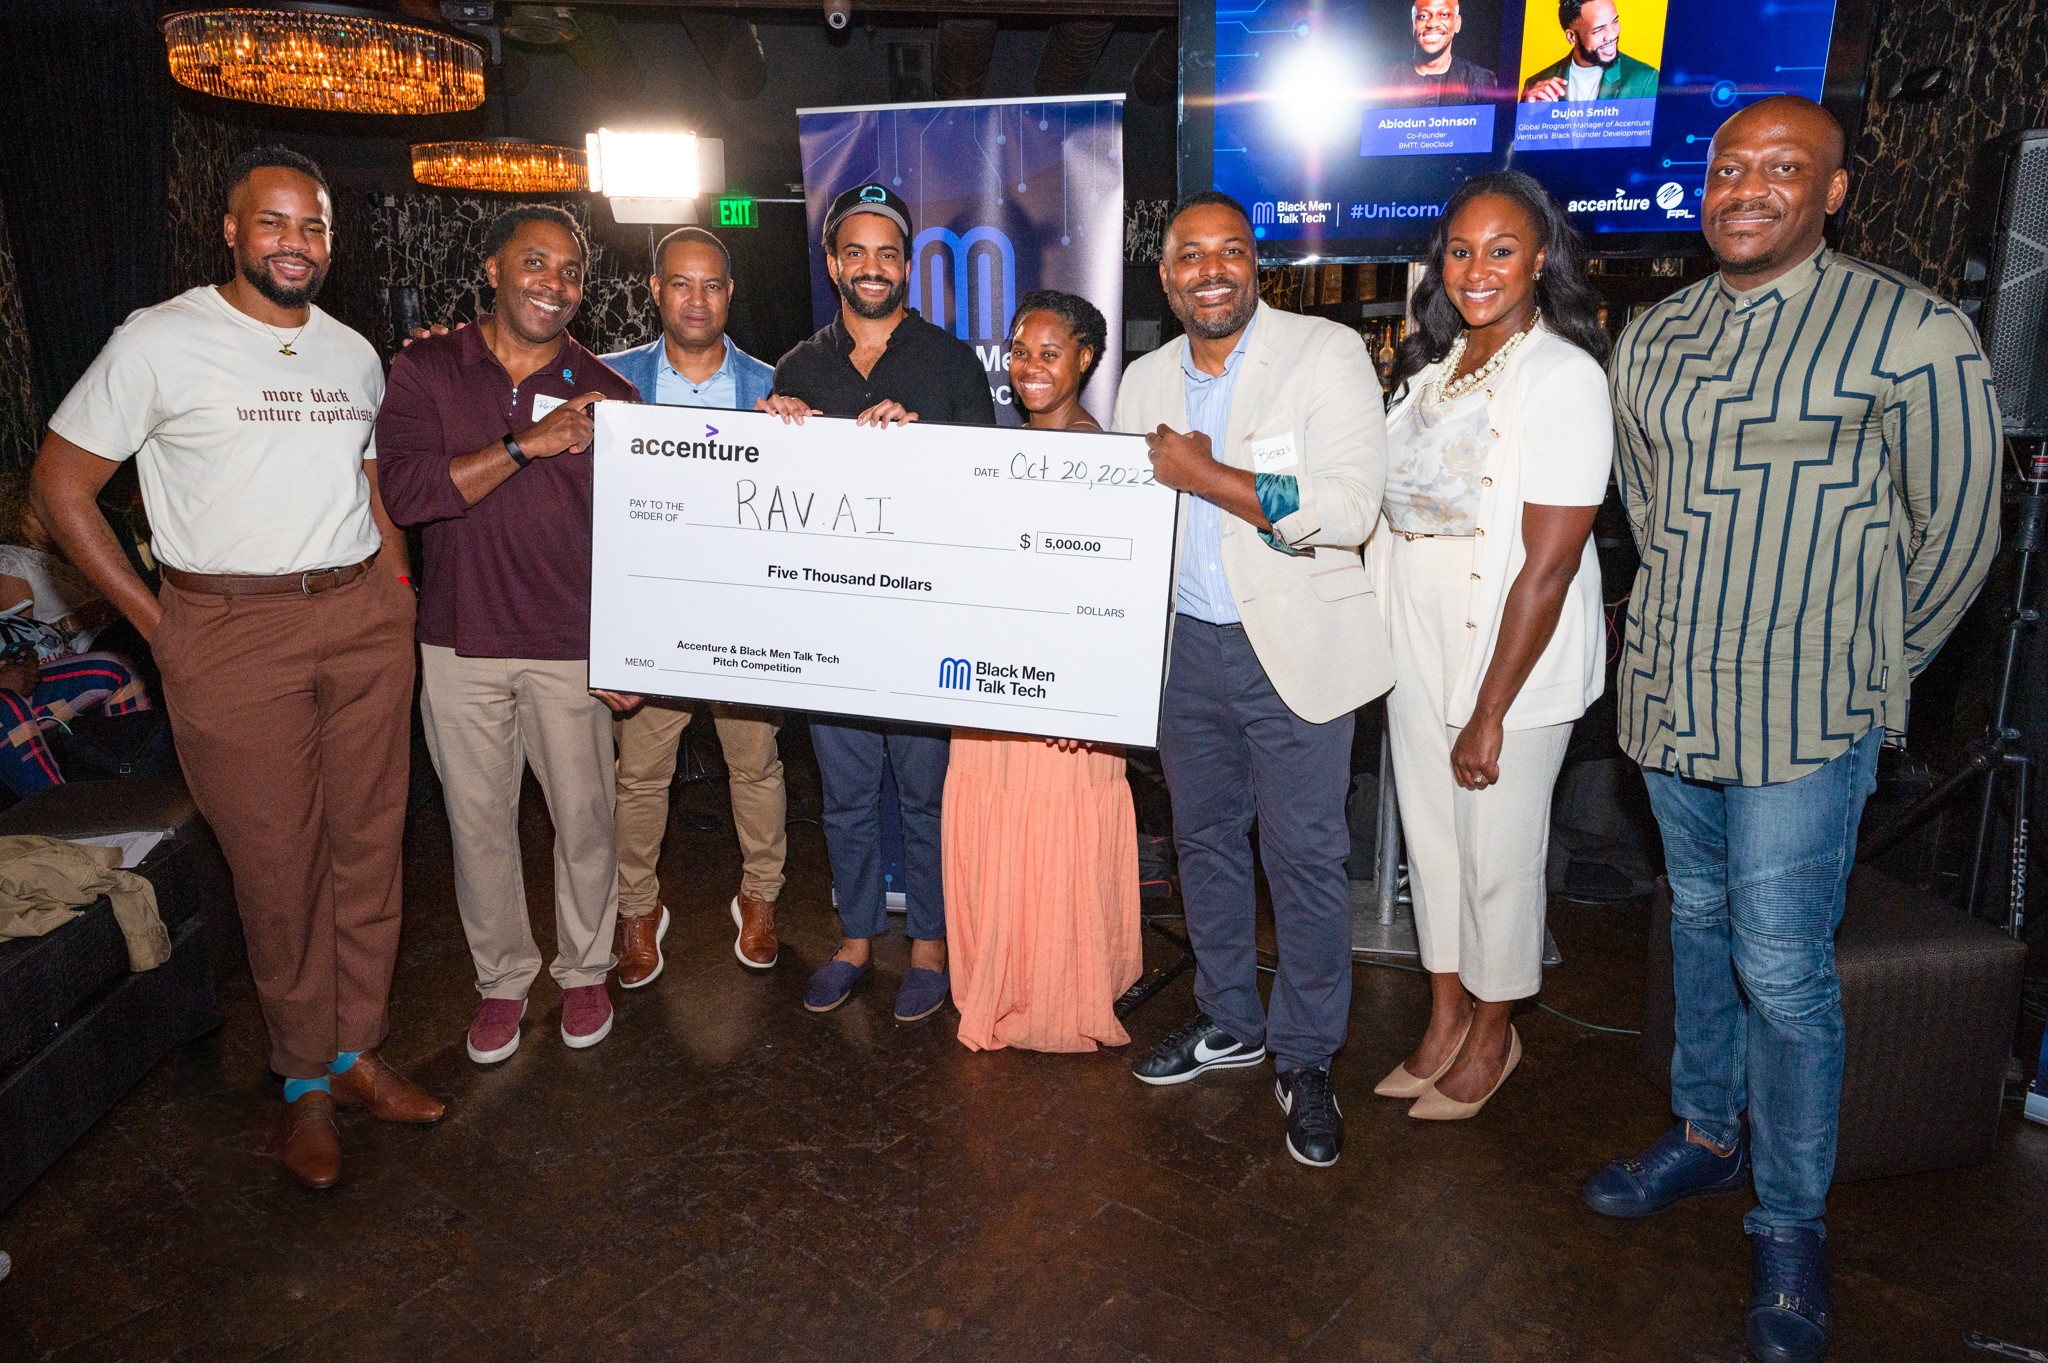 Florida Power & Light Company Supports the Black Men Talk Tech’s Pitch Competition